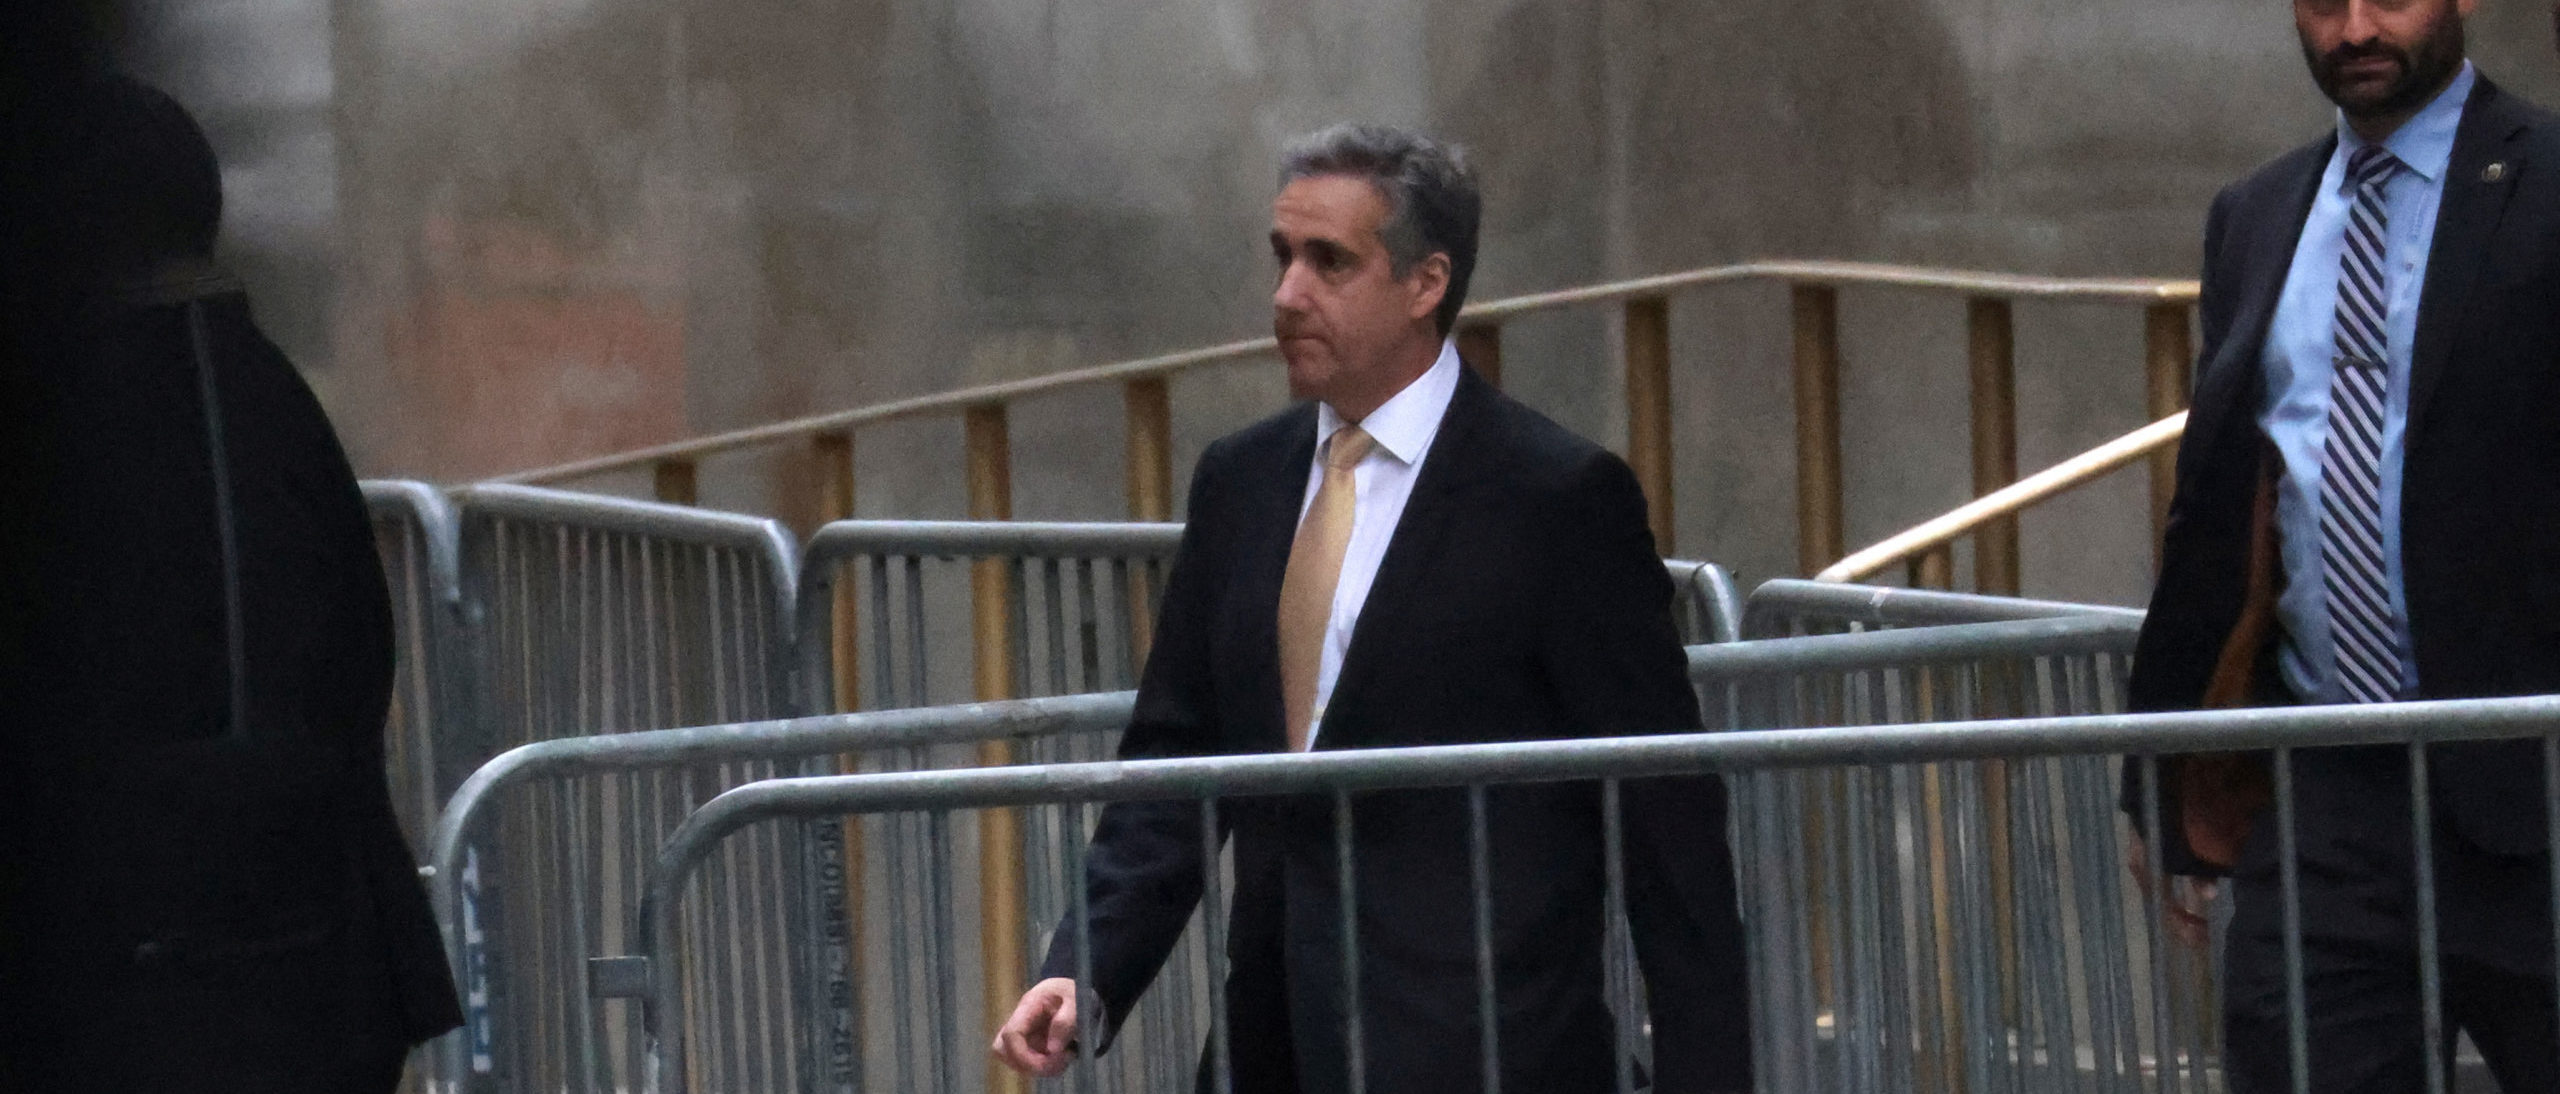 Trump’s Attorney Made Swiss Cheese Out Of Michael Cohen’s Testimony, Raising Questions Of Perjury